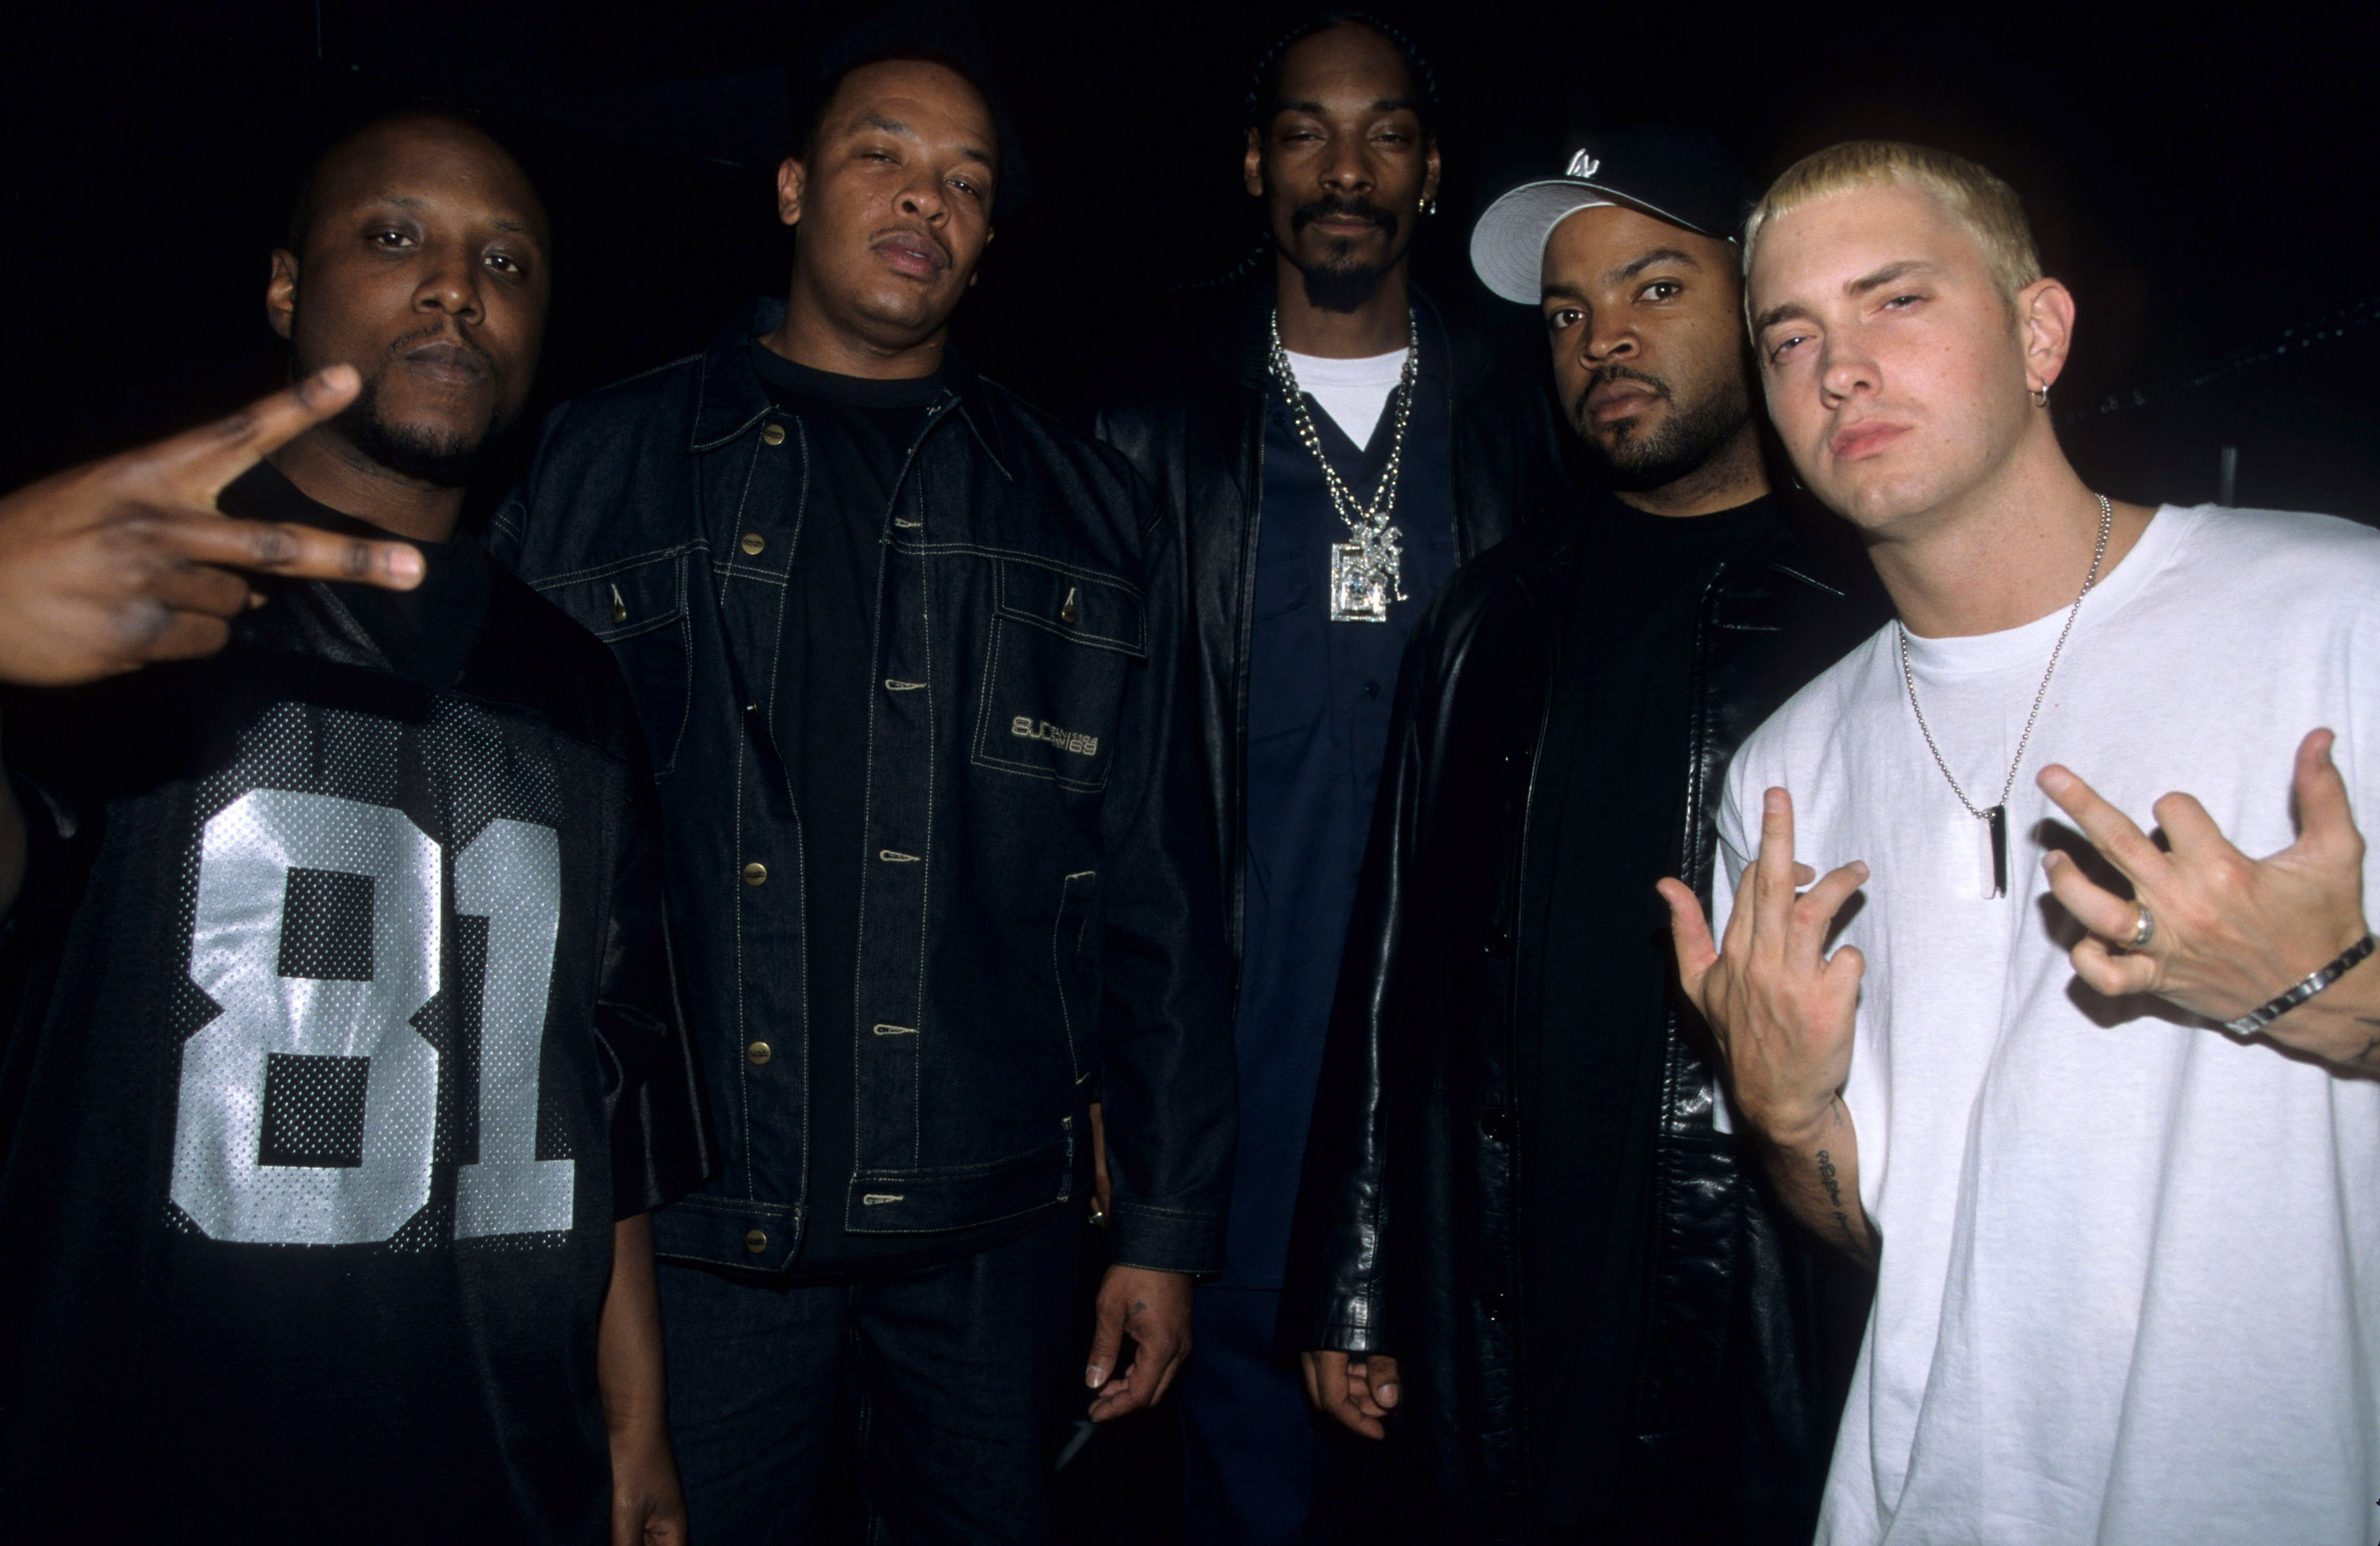 Stream Dr. Dre - Back In The Game Ft. Ice Cube & Snoop Dogg by Gofi